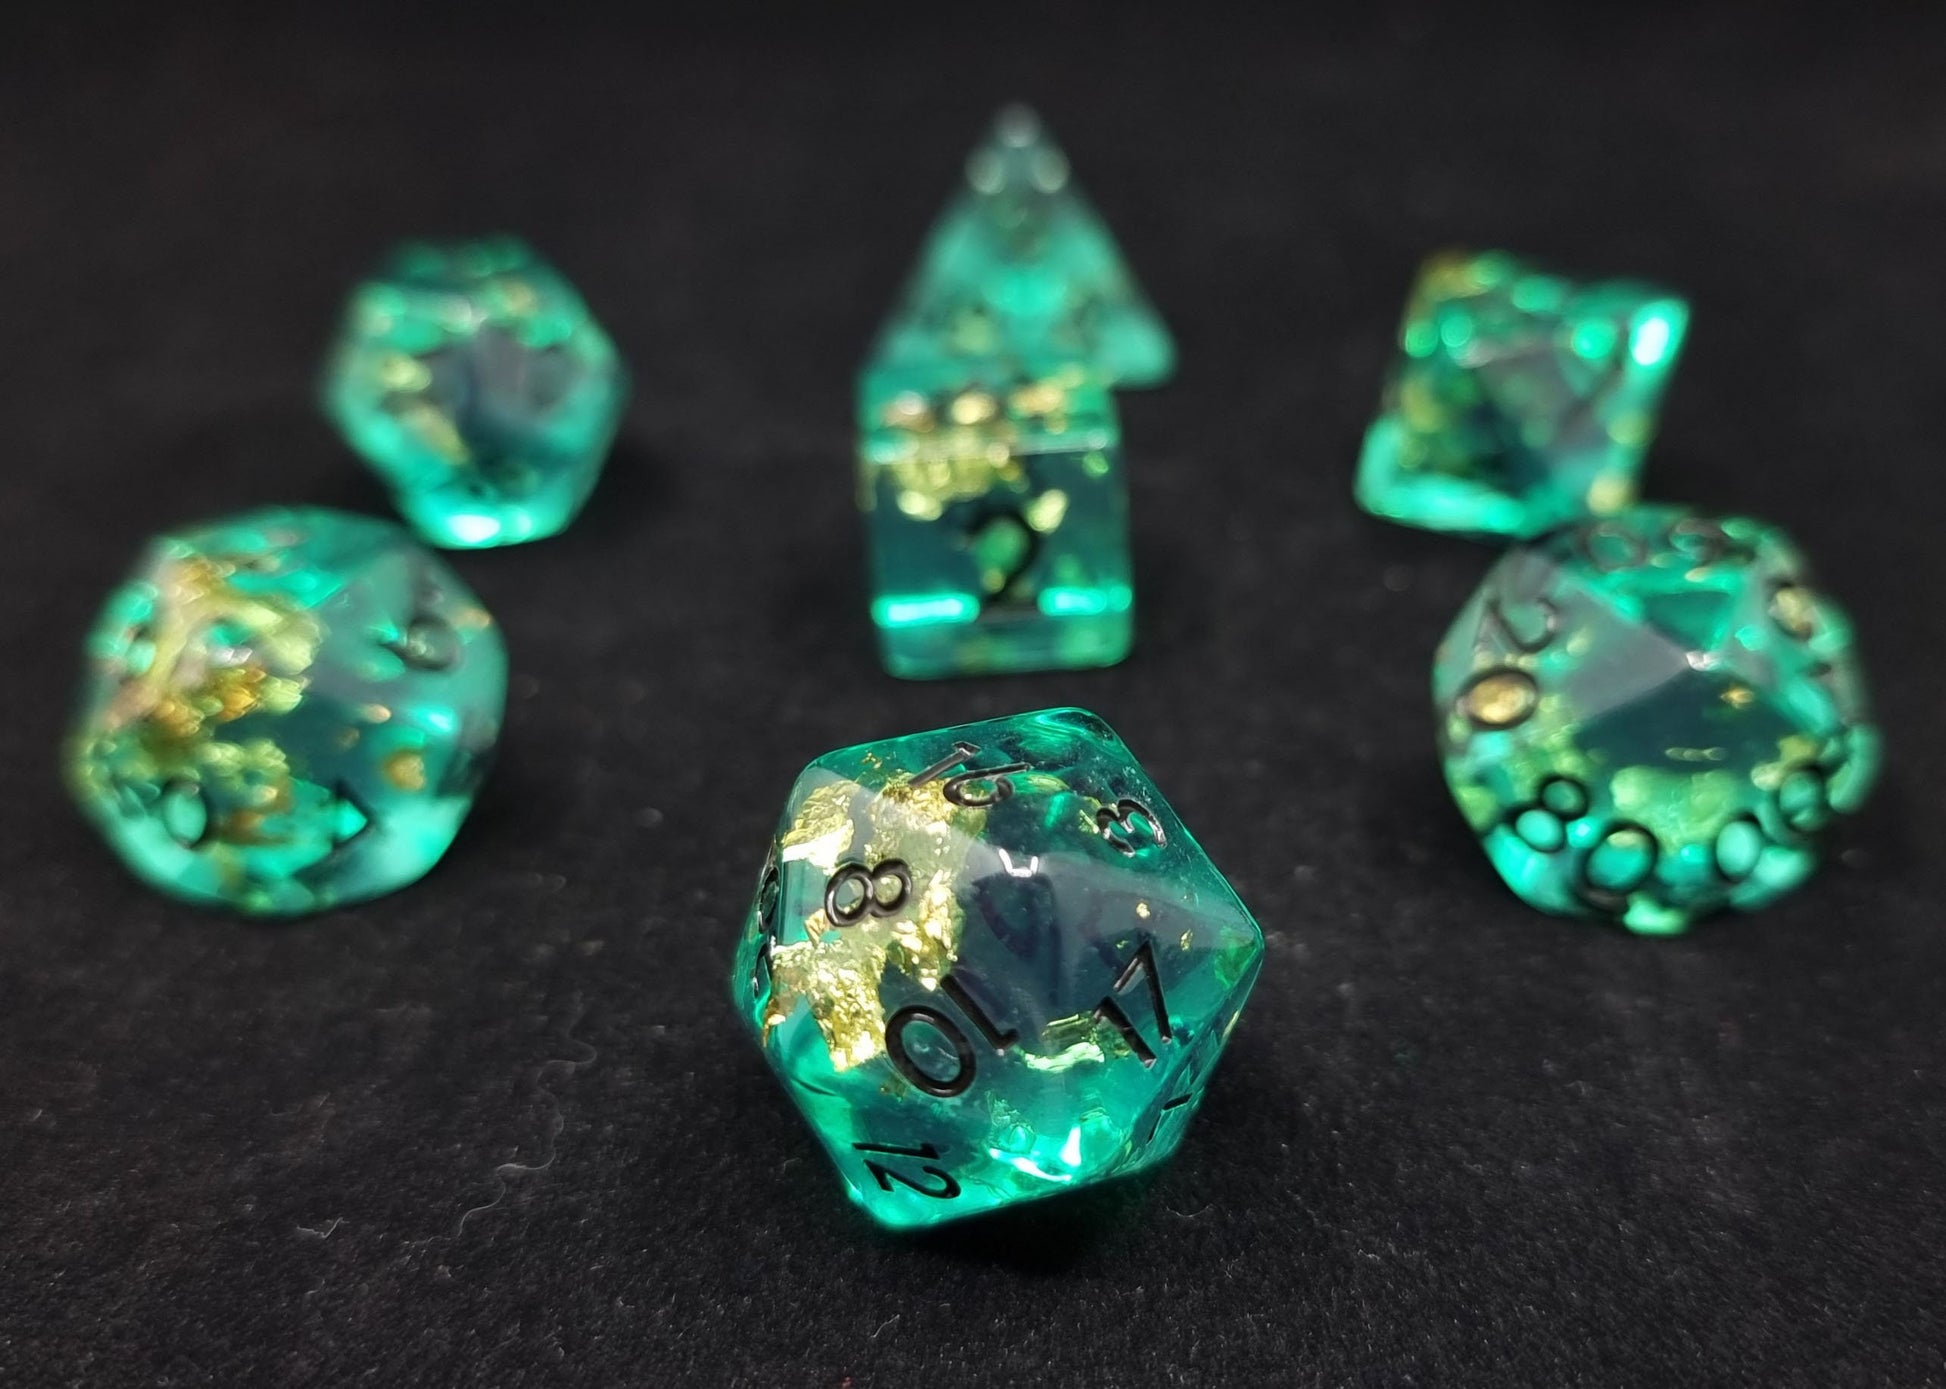 Aztec Gold Polyhedral Dice Set - Clear Teal Green Dice with Gold Flake